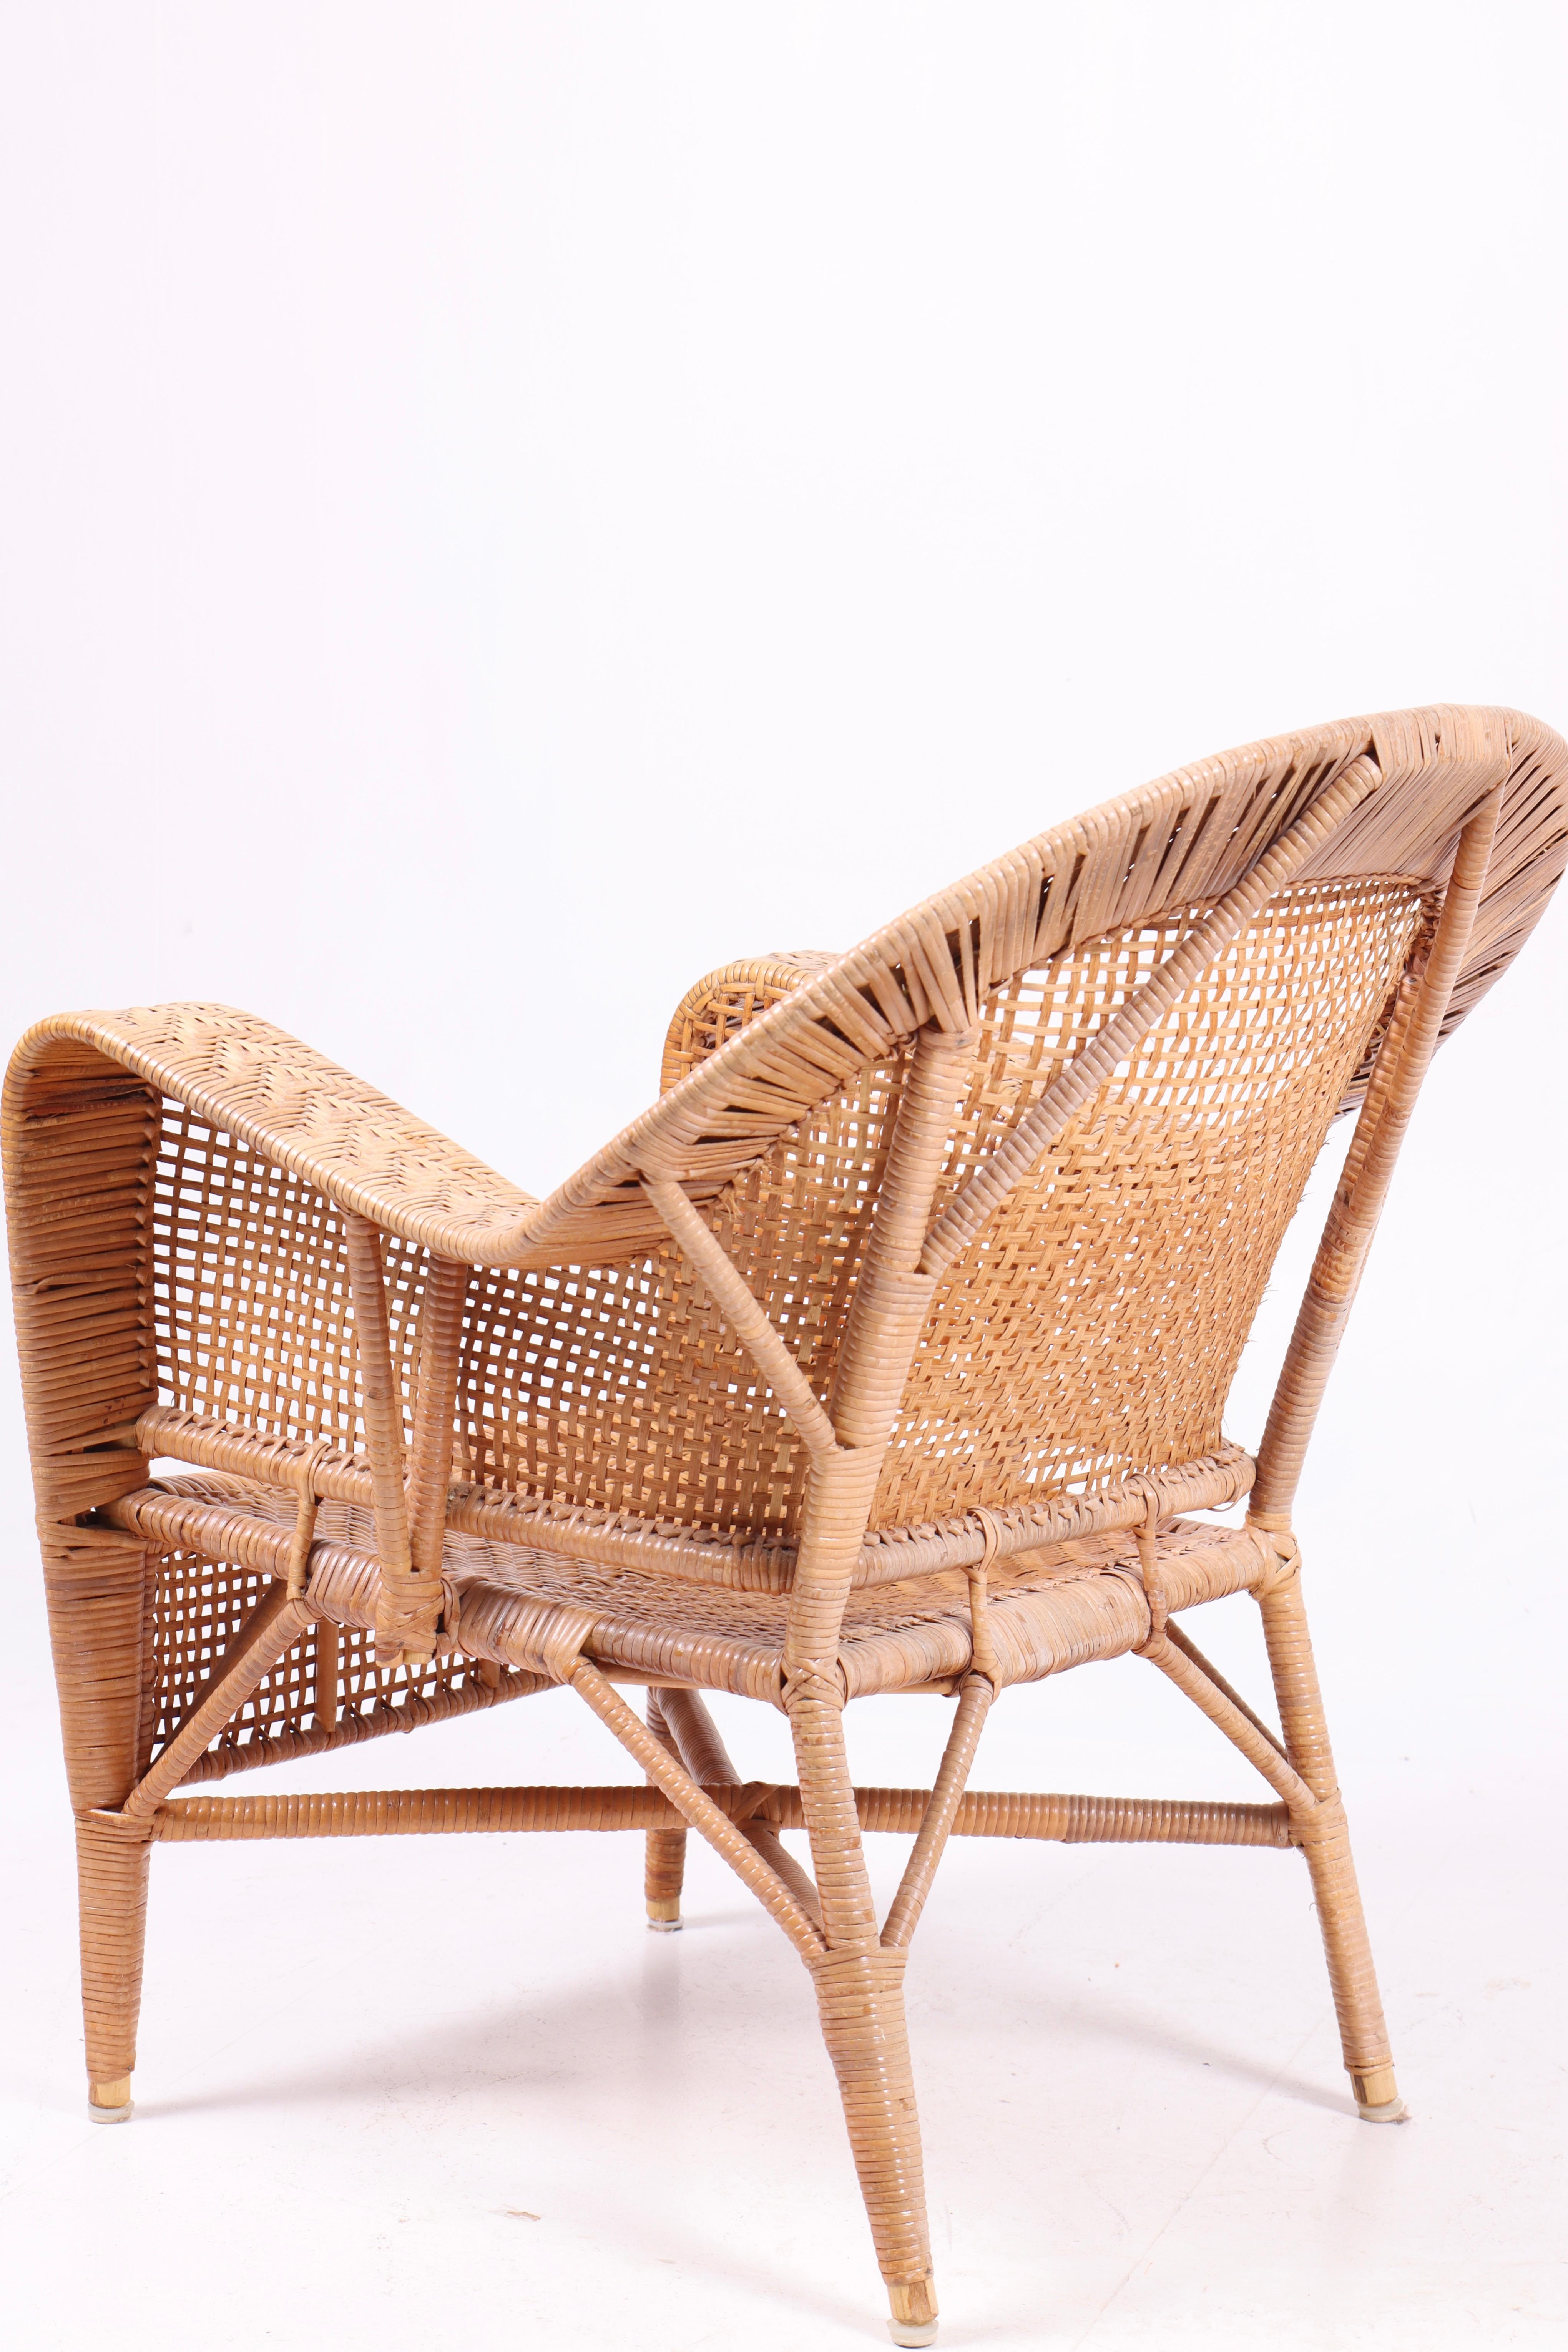 Pair of Rattan Lounge Chairs by Kay Fisker, 1950s In Good Condition For Sale In Lejre, DK